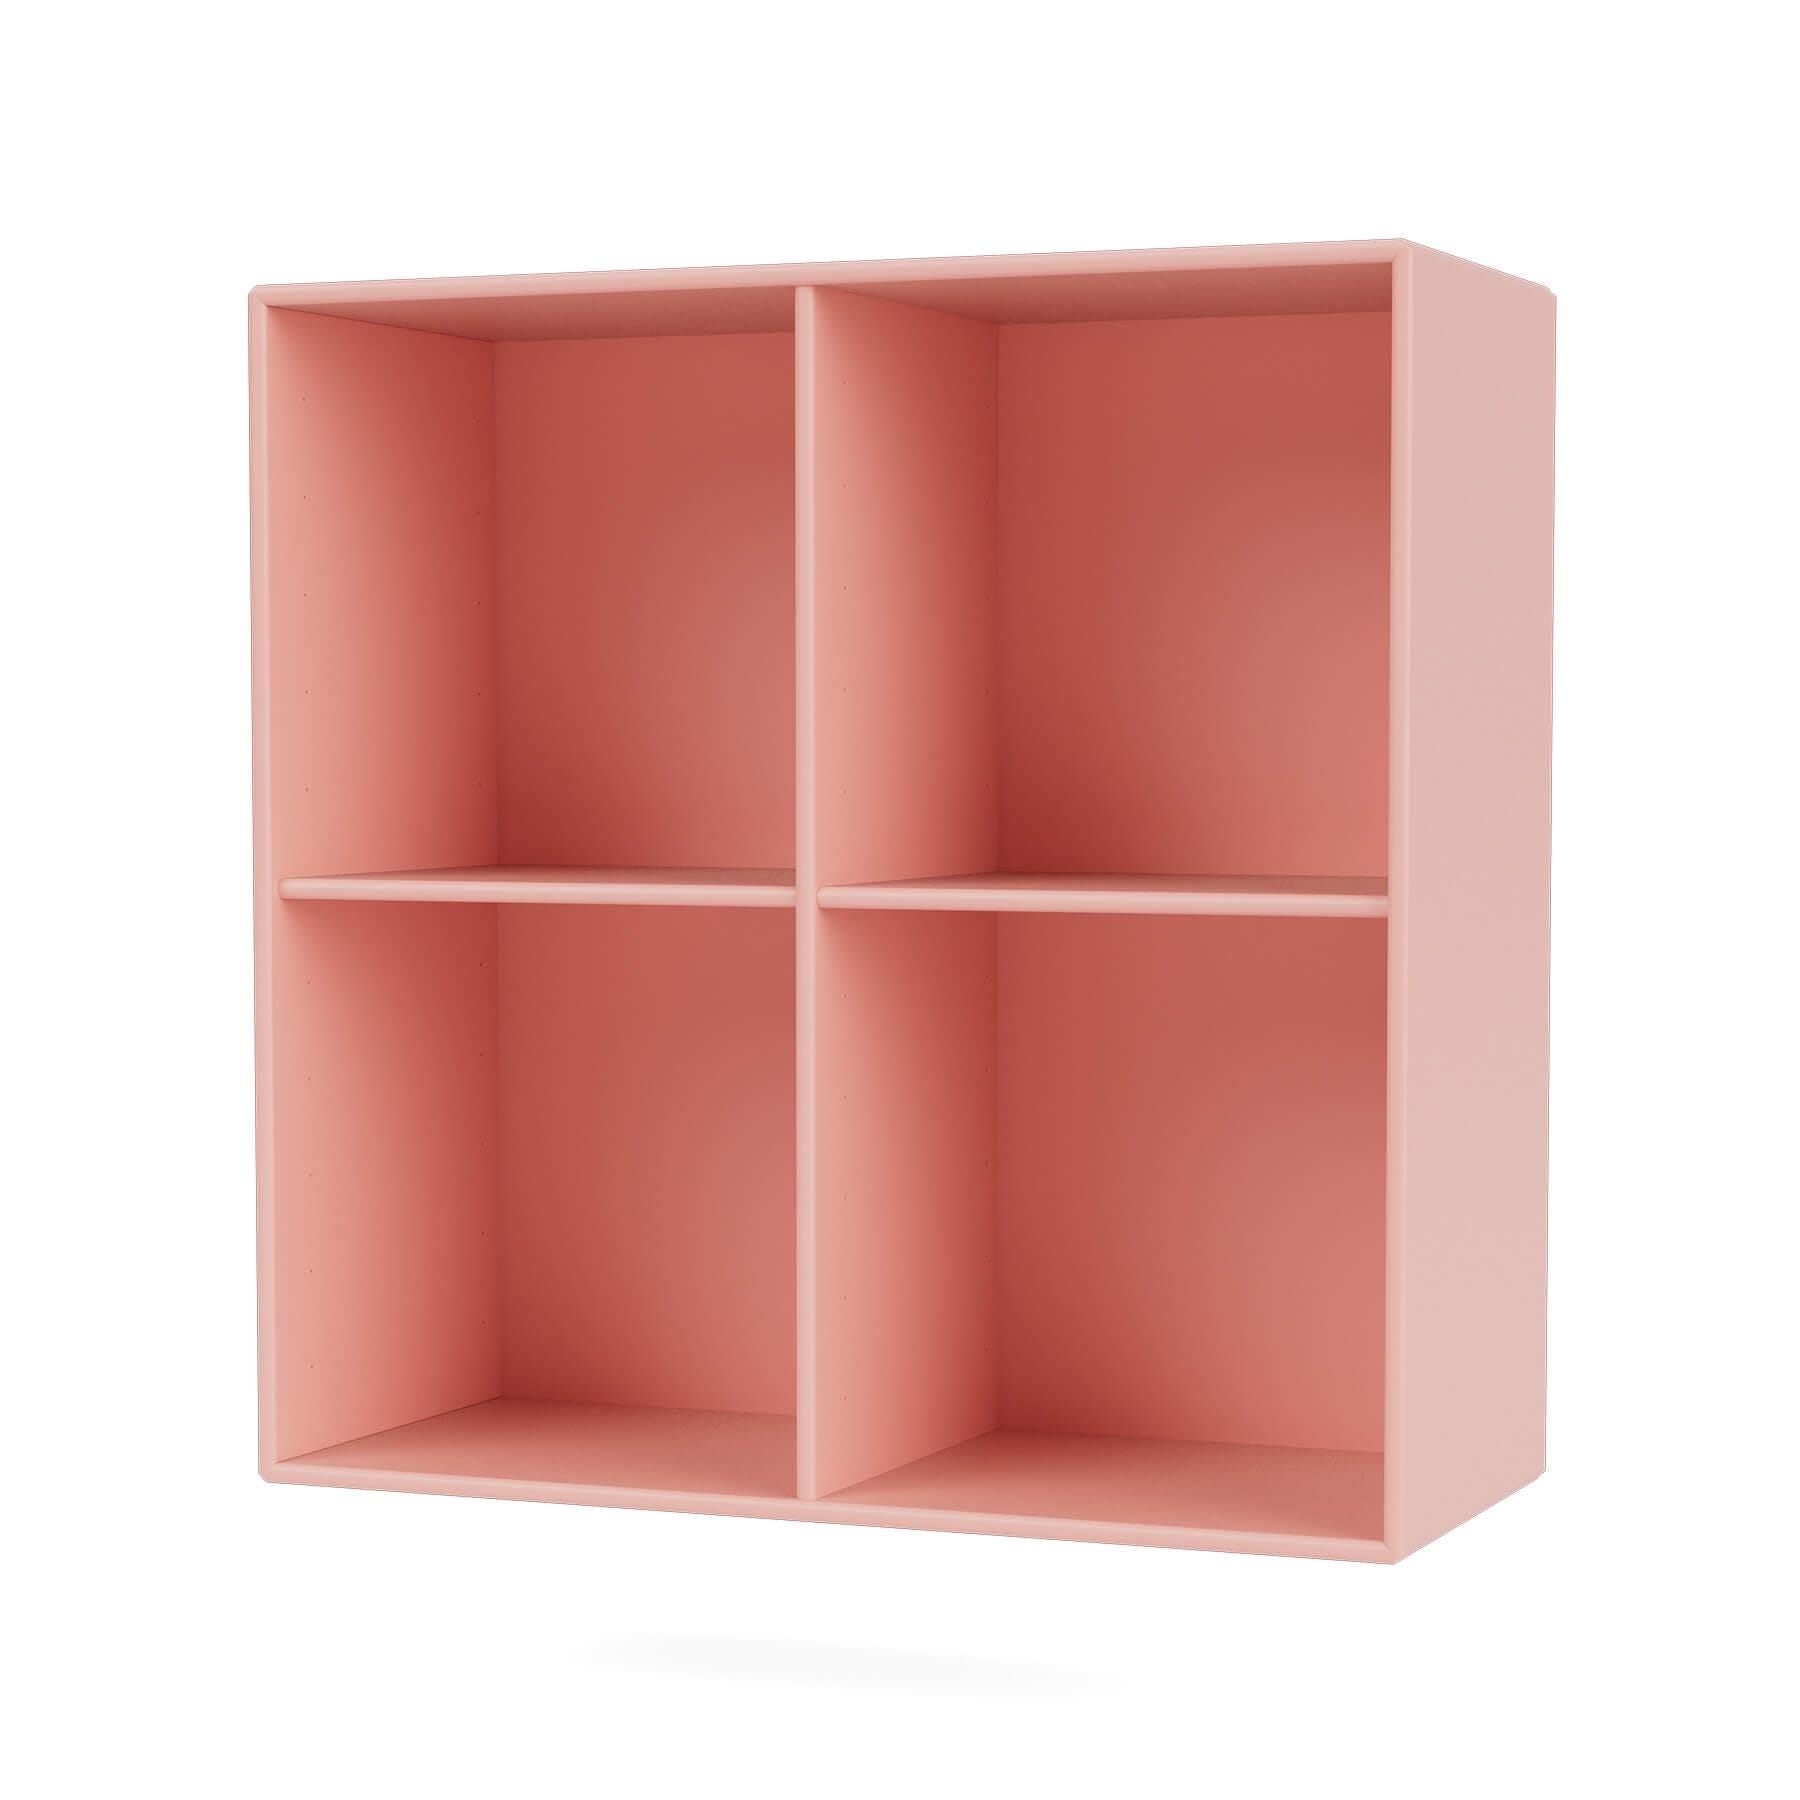 Montana Show Bookcase Ruby Wall Mounted Pink Designer Furniture From Holloways Of Ludlow